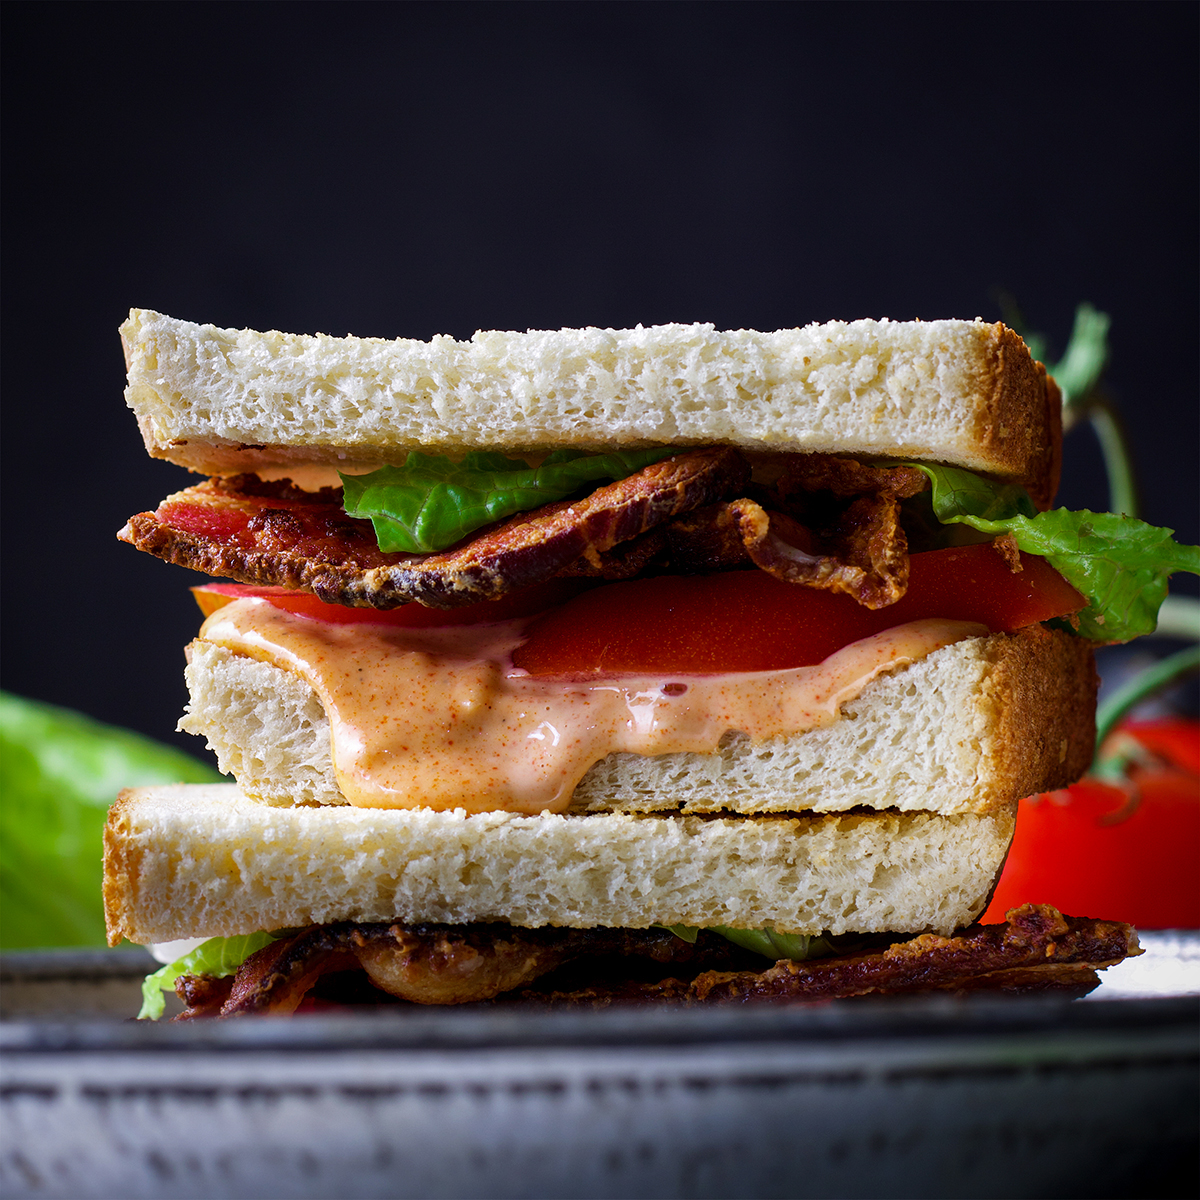 Two halves of a BLT sandwich on a plate, ready to eat.